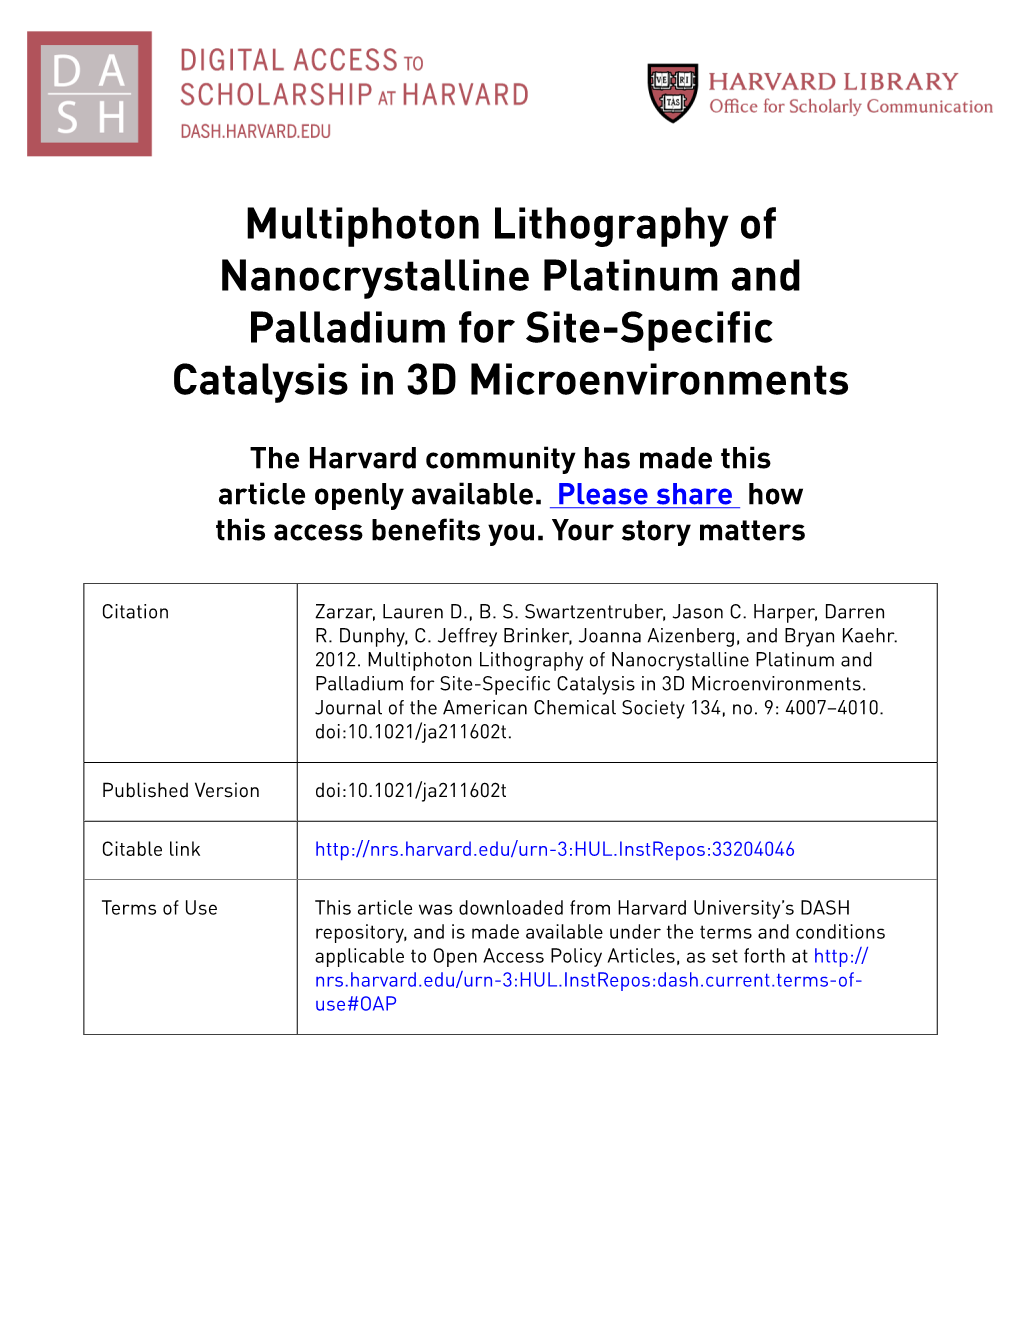 Multiphoton Lithography of Nanocrystalline Platinum and Palladium for Site-Specific Catalysis in 3D Microenvironments